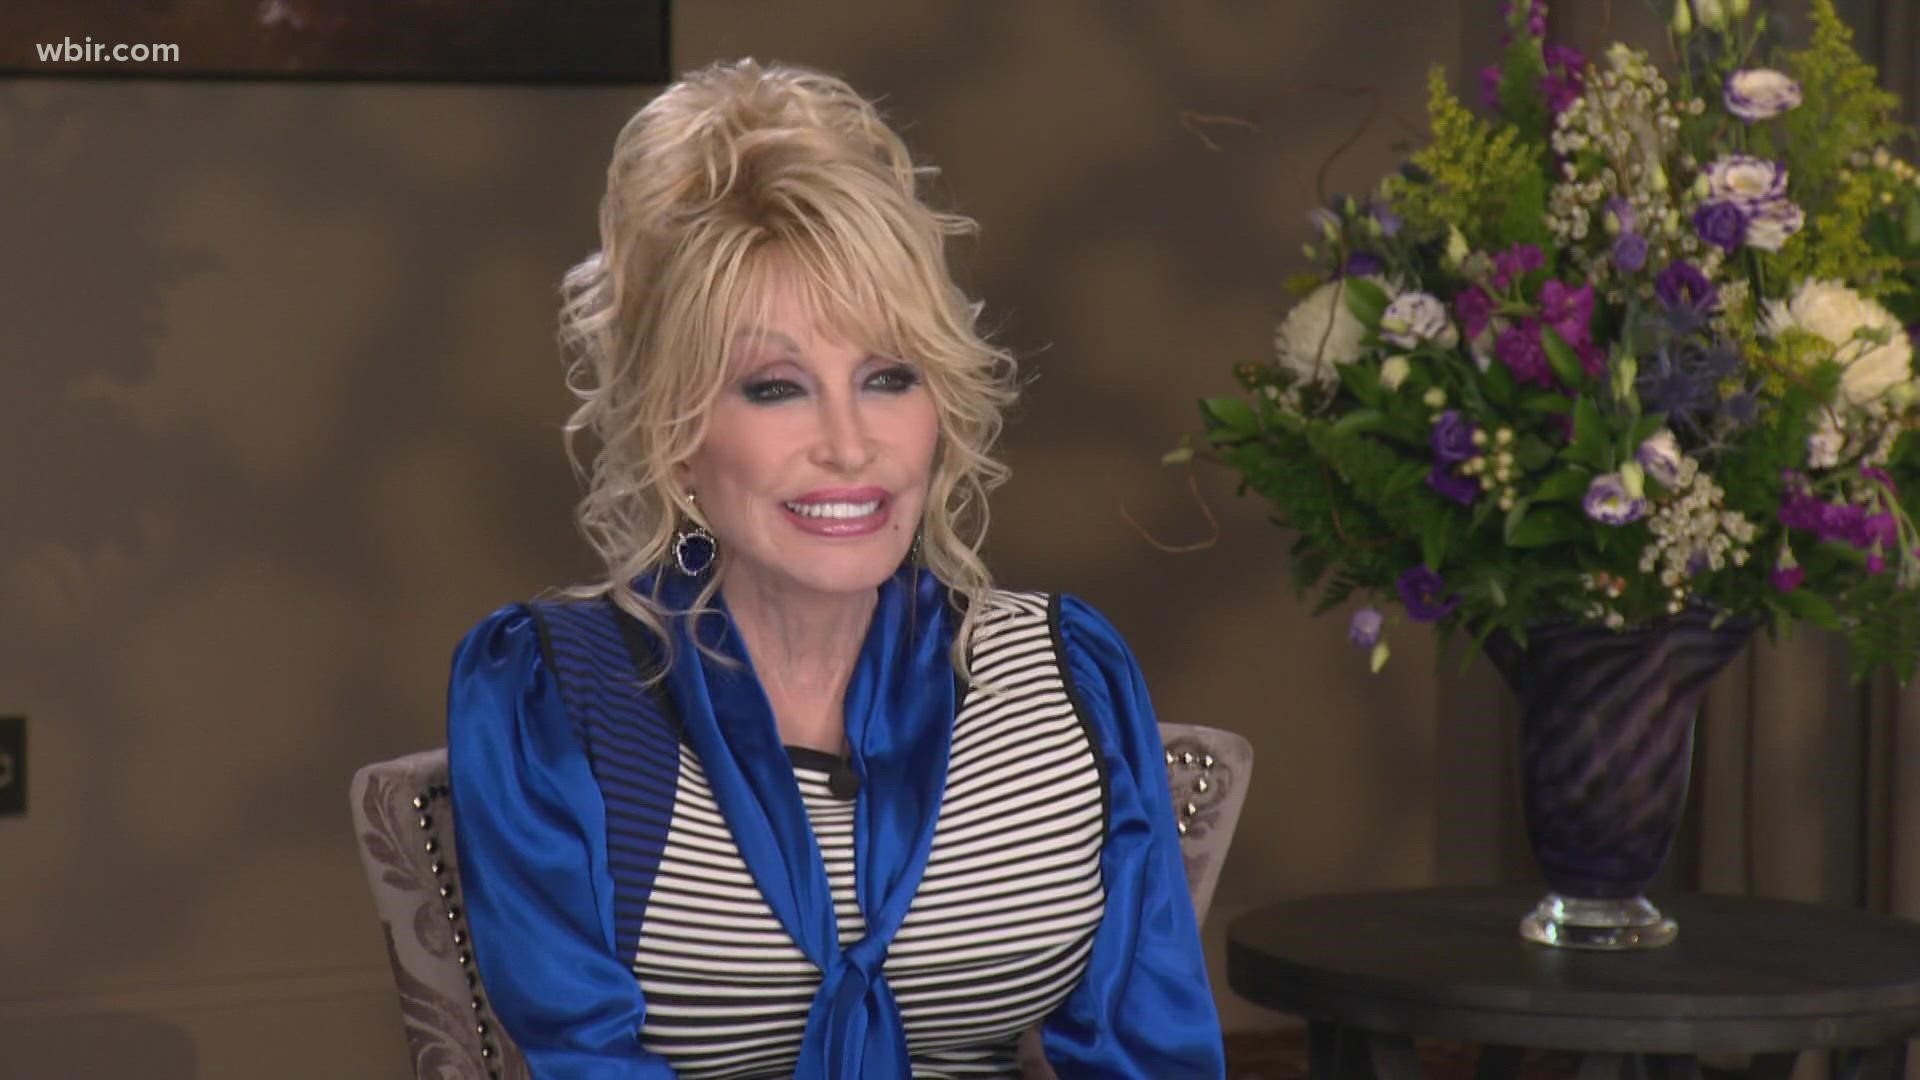 Dolly Parton paid a visit to her theme park, Dollywood, for the first time since 2019 for its 37th season.